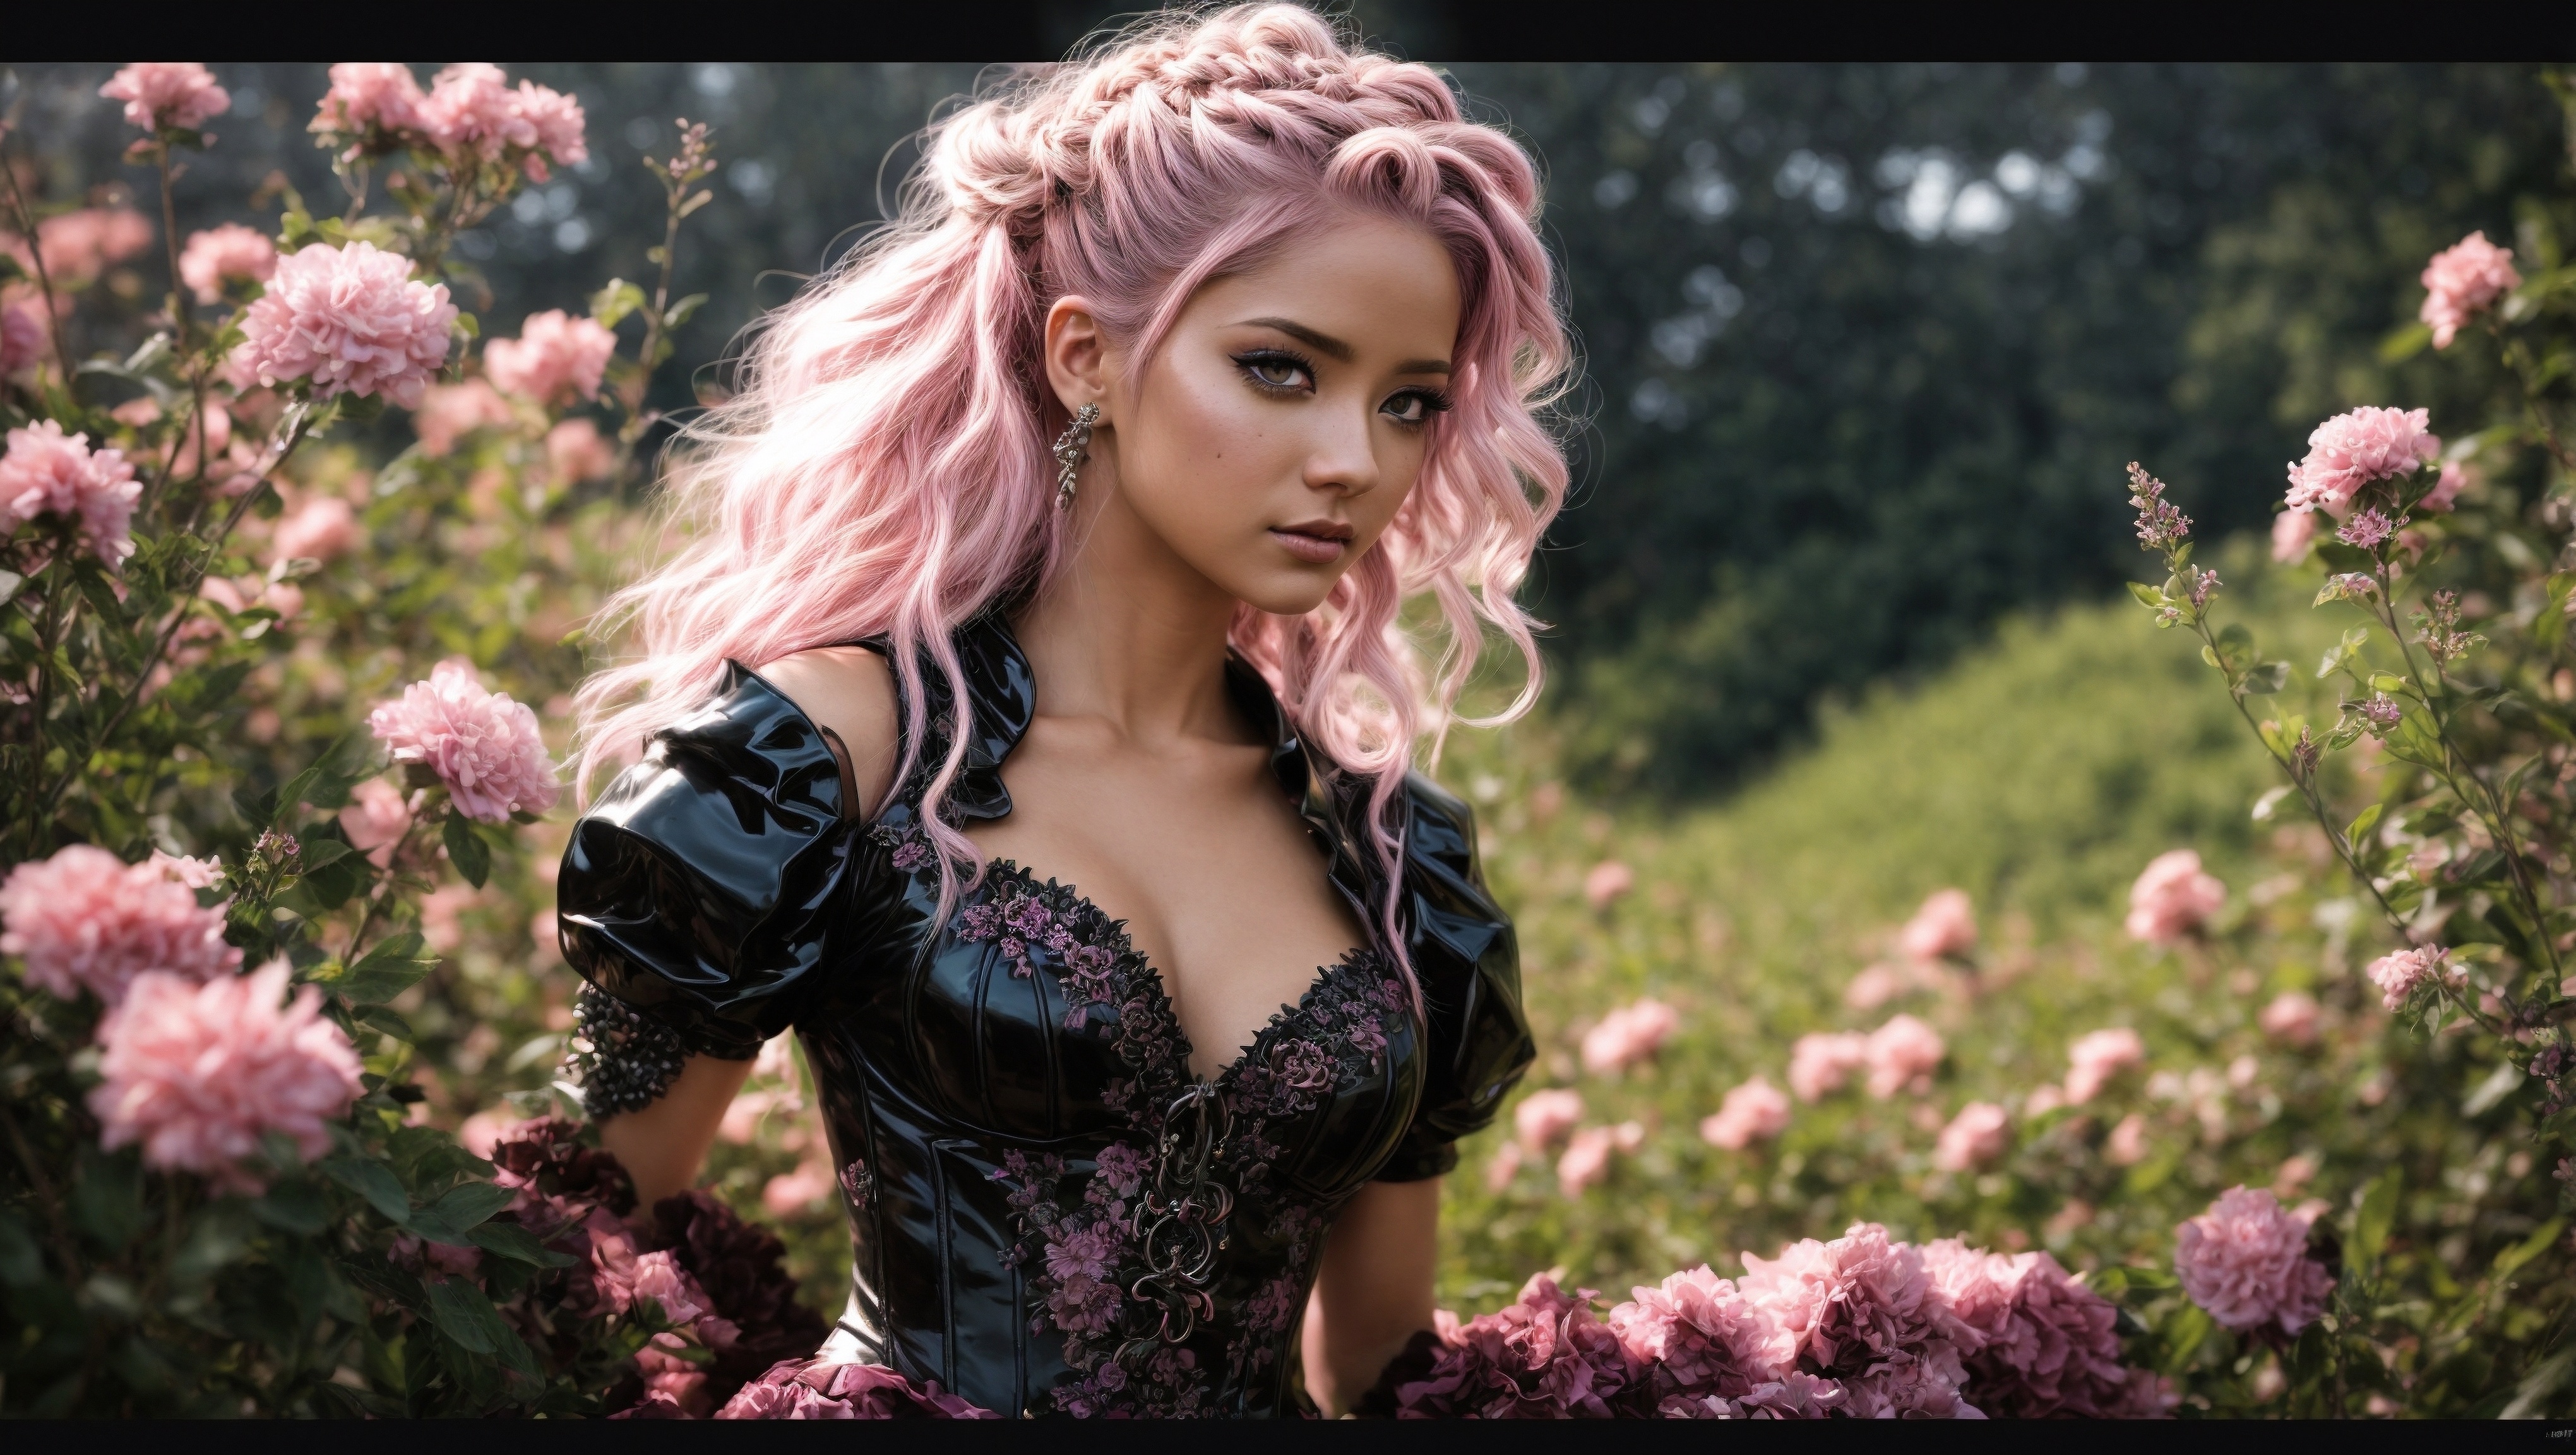 Free photo A woman with pink hair standing next to flowers